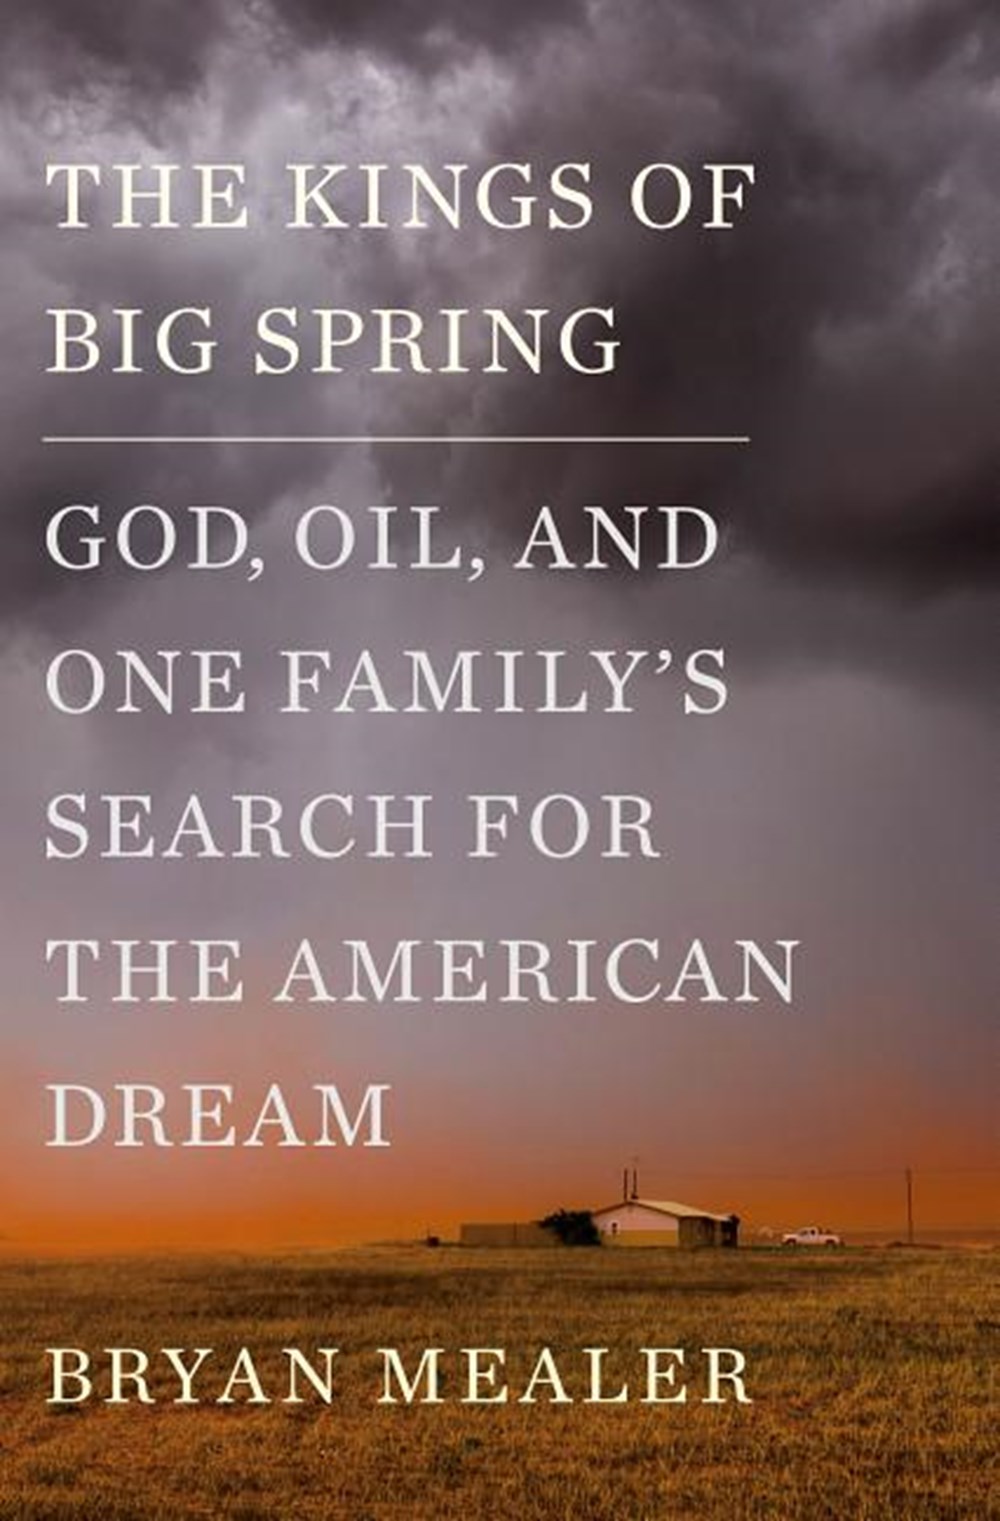 Kings of Big Spring God, Oil, and One Family's Search for the American Dream